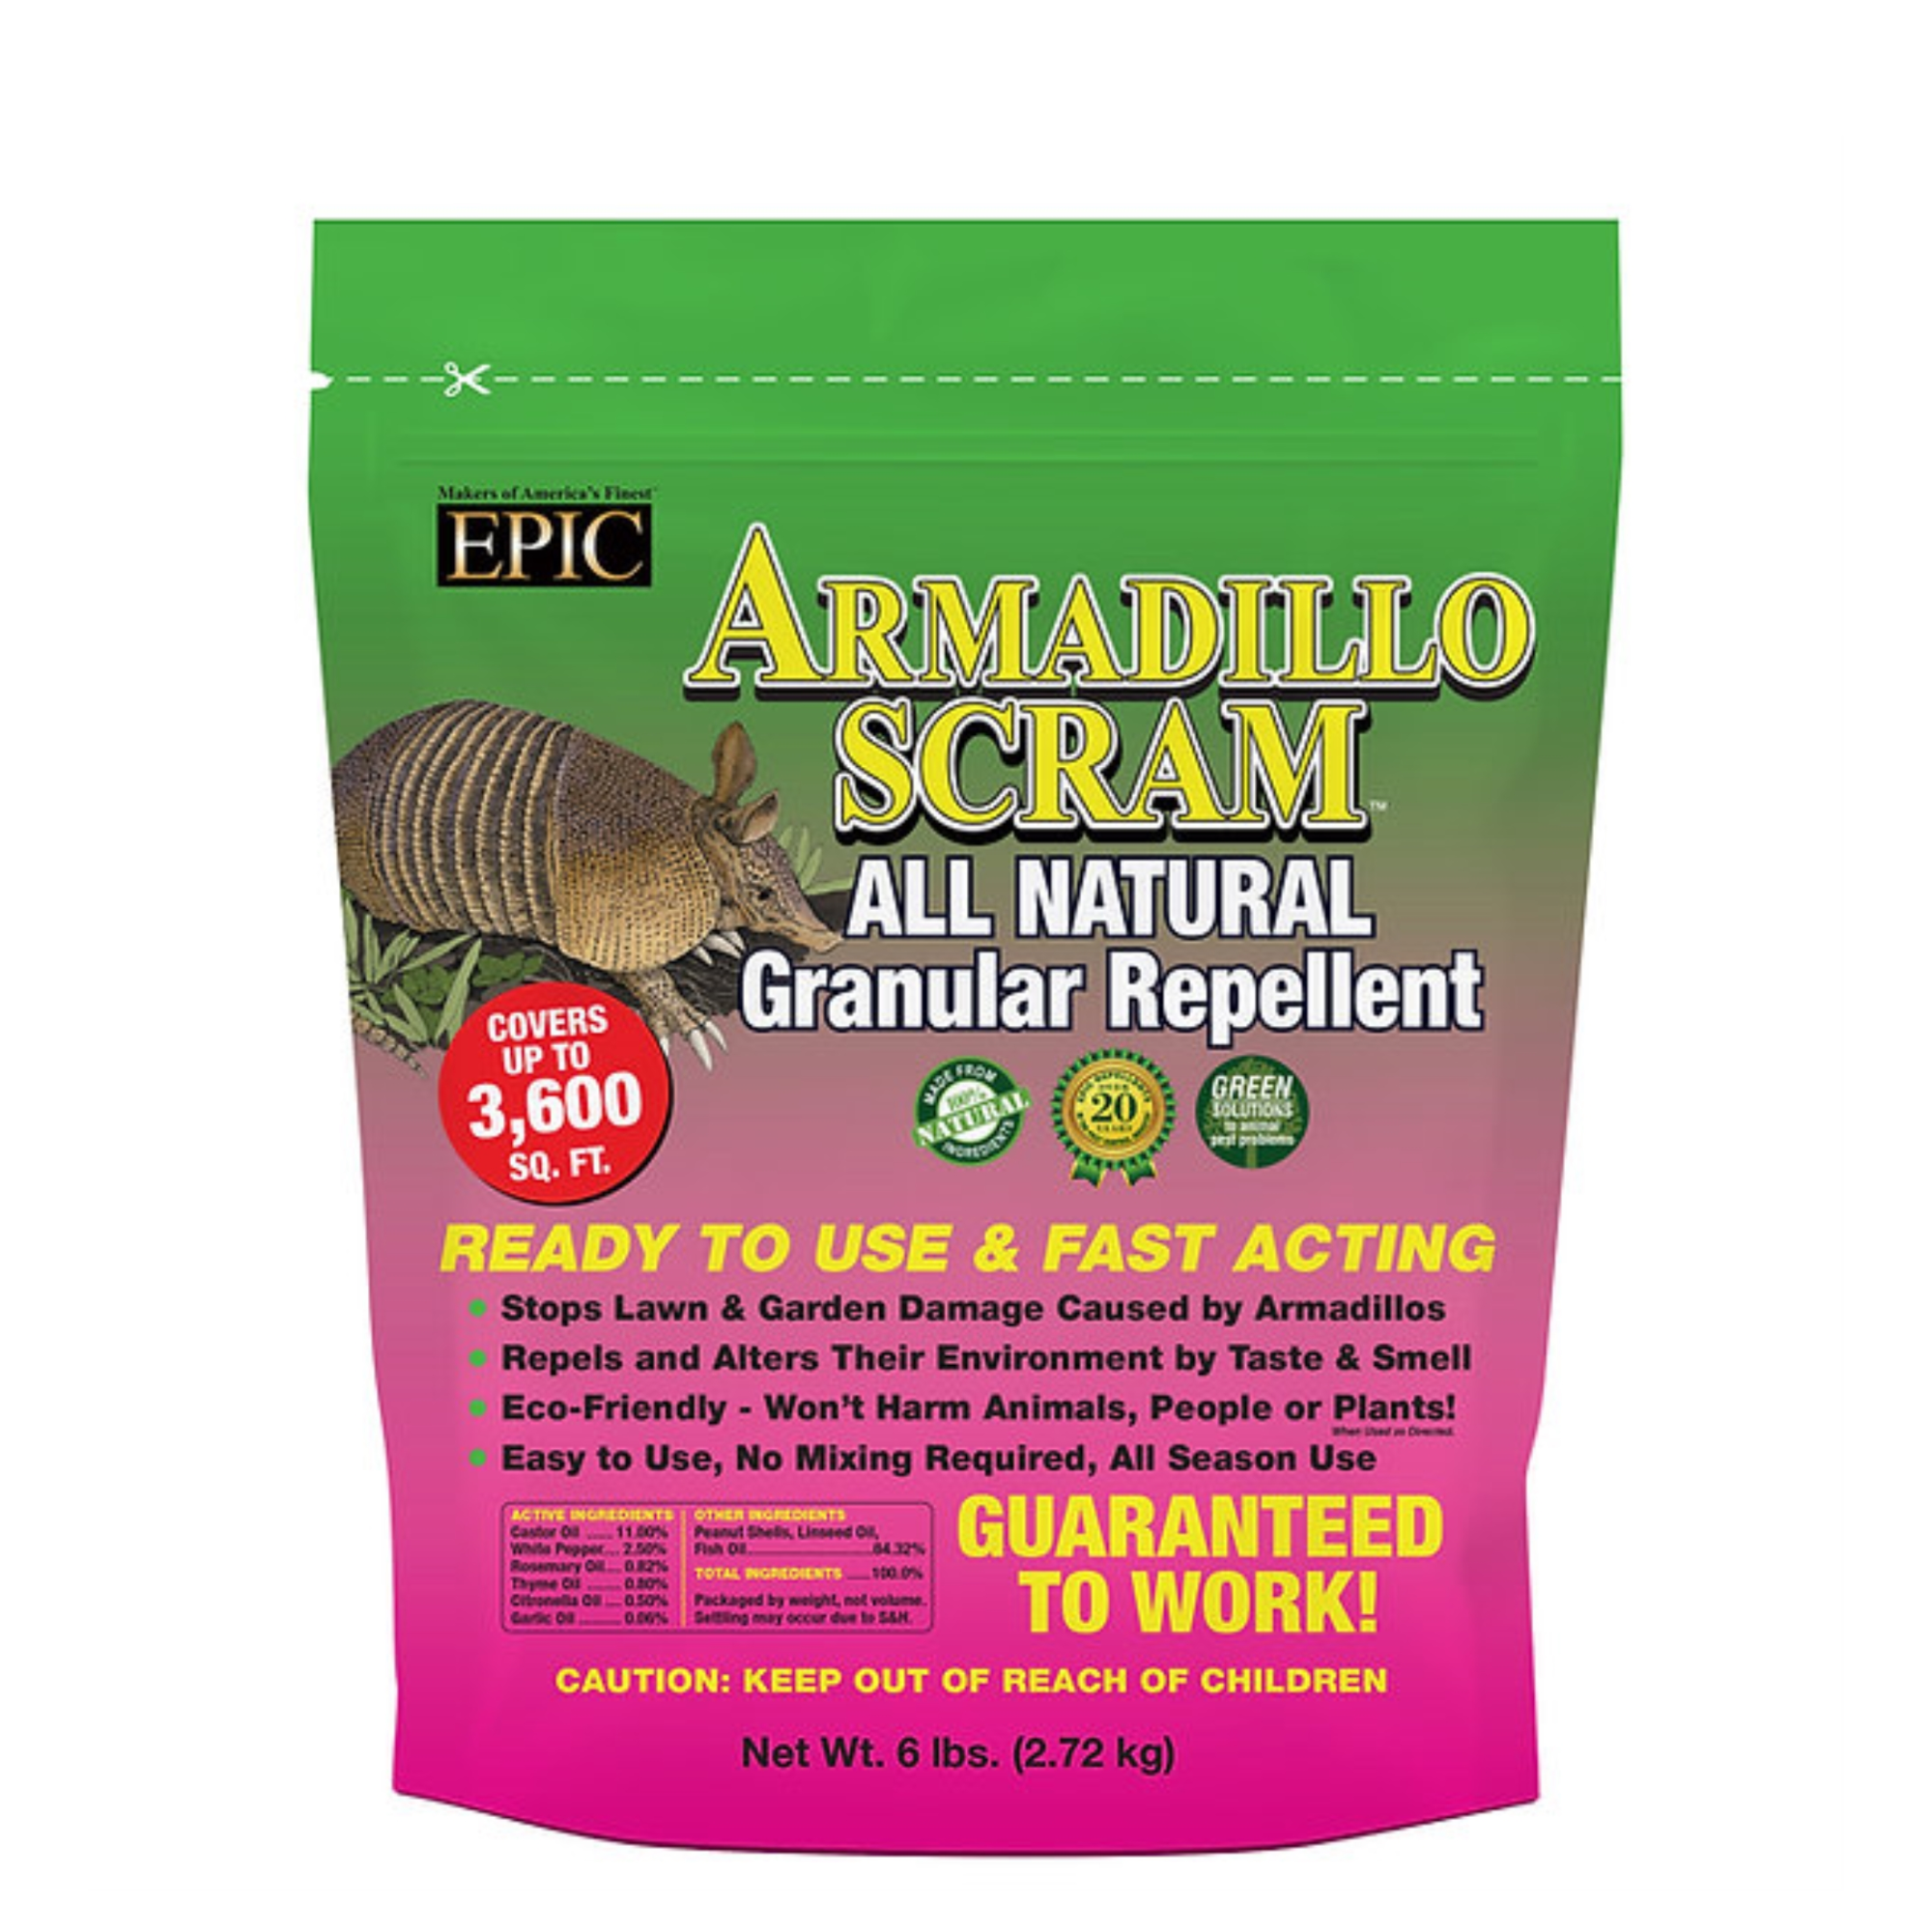 EPIC Armadillo Scram All Natural Ready To Use Outdoor Granular Animal Repellent Resealable Bag, 6lbs